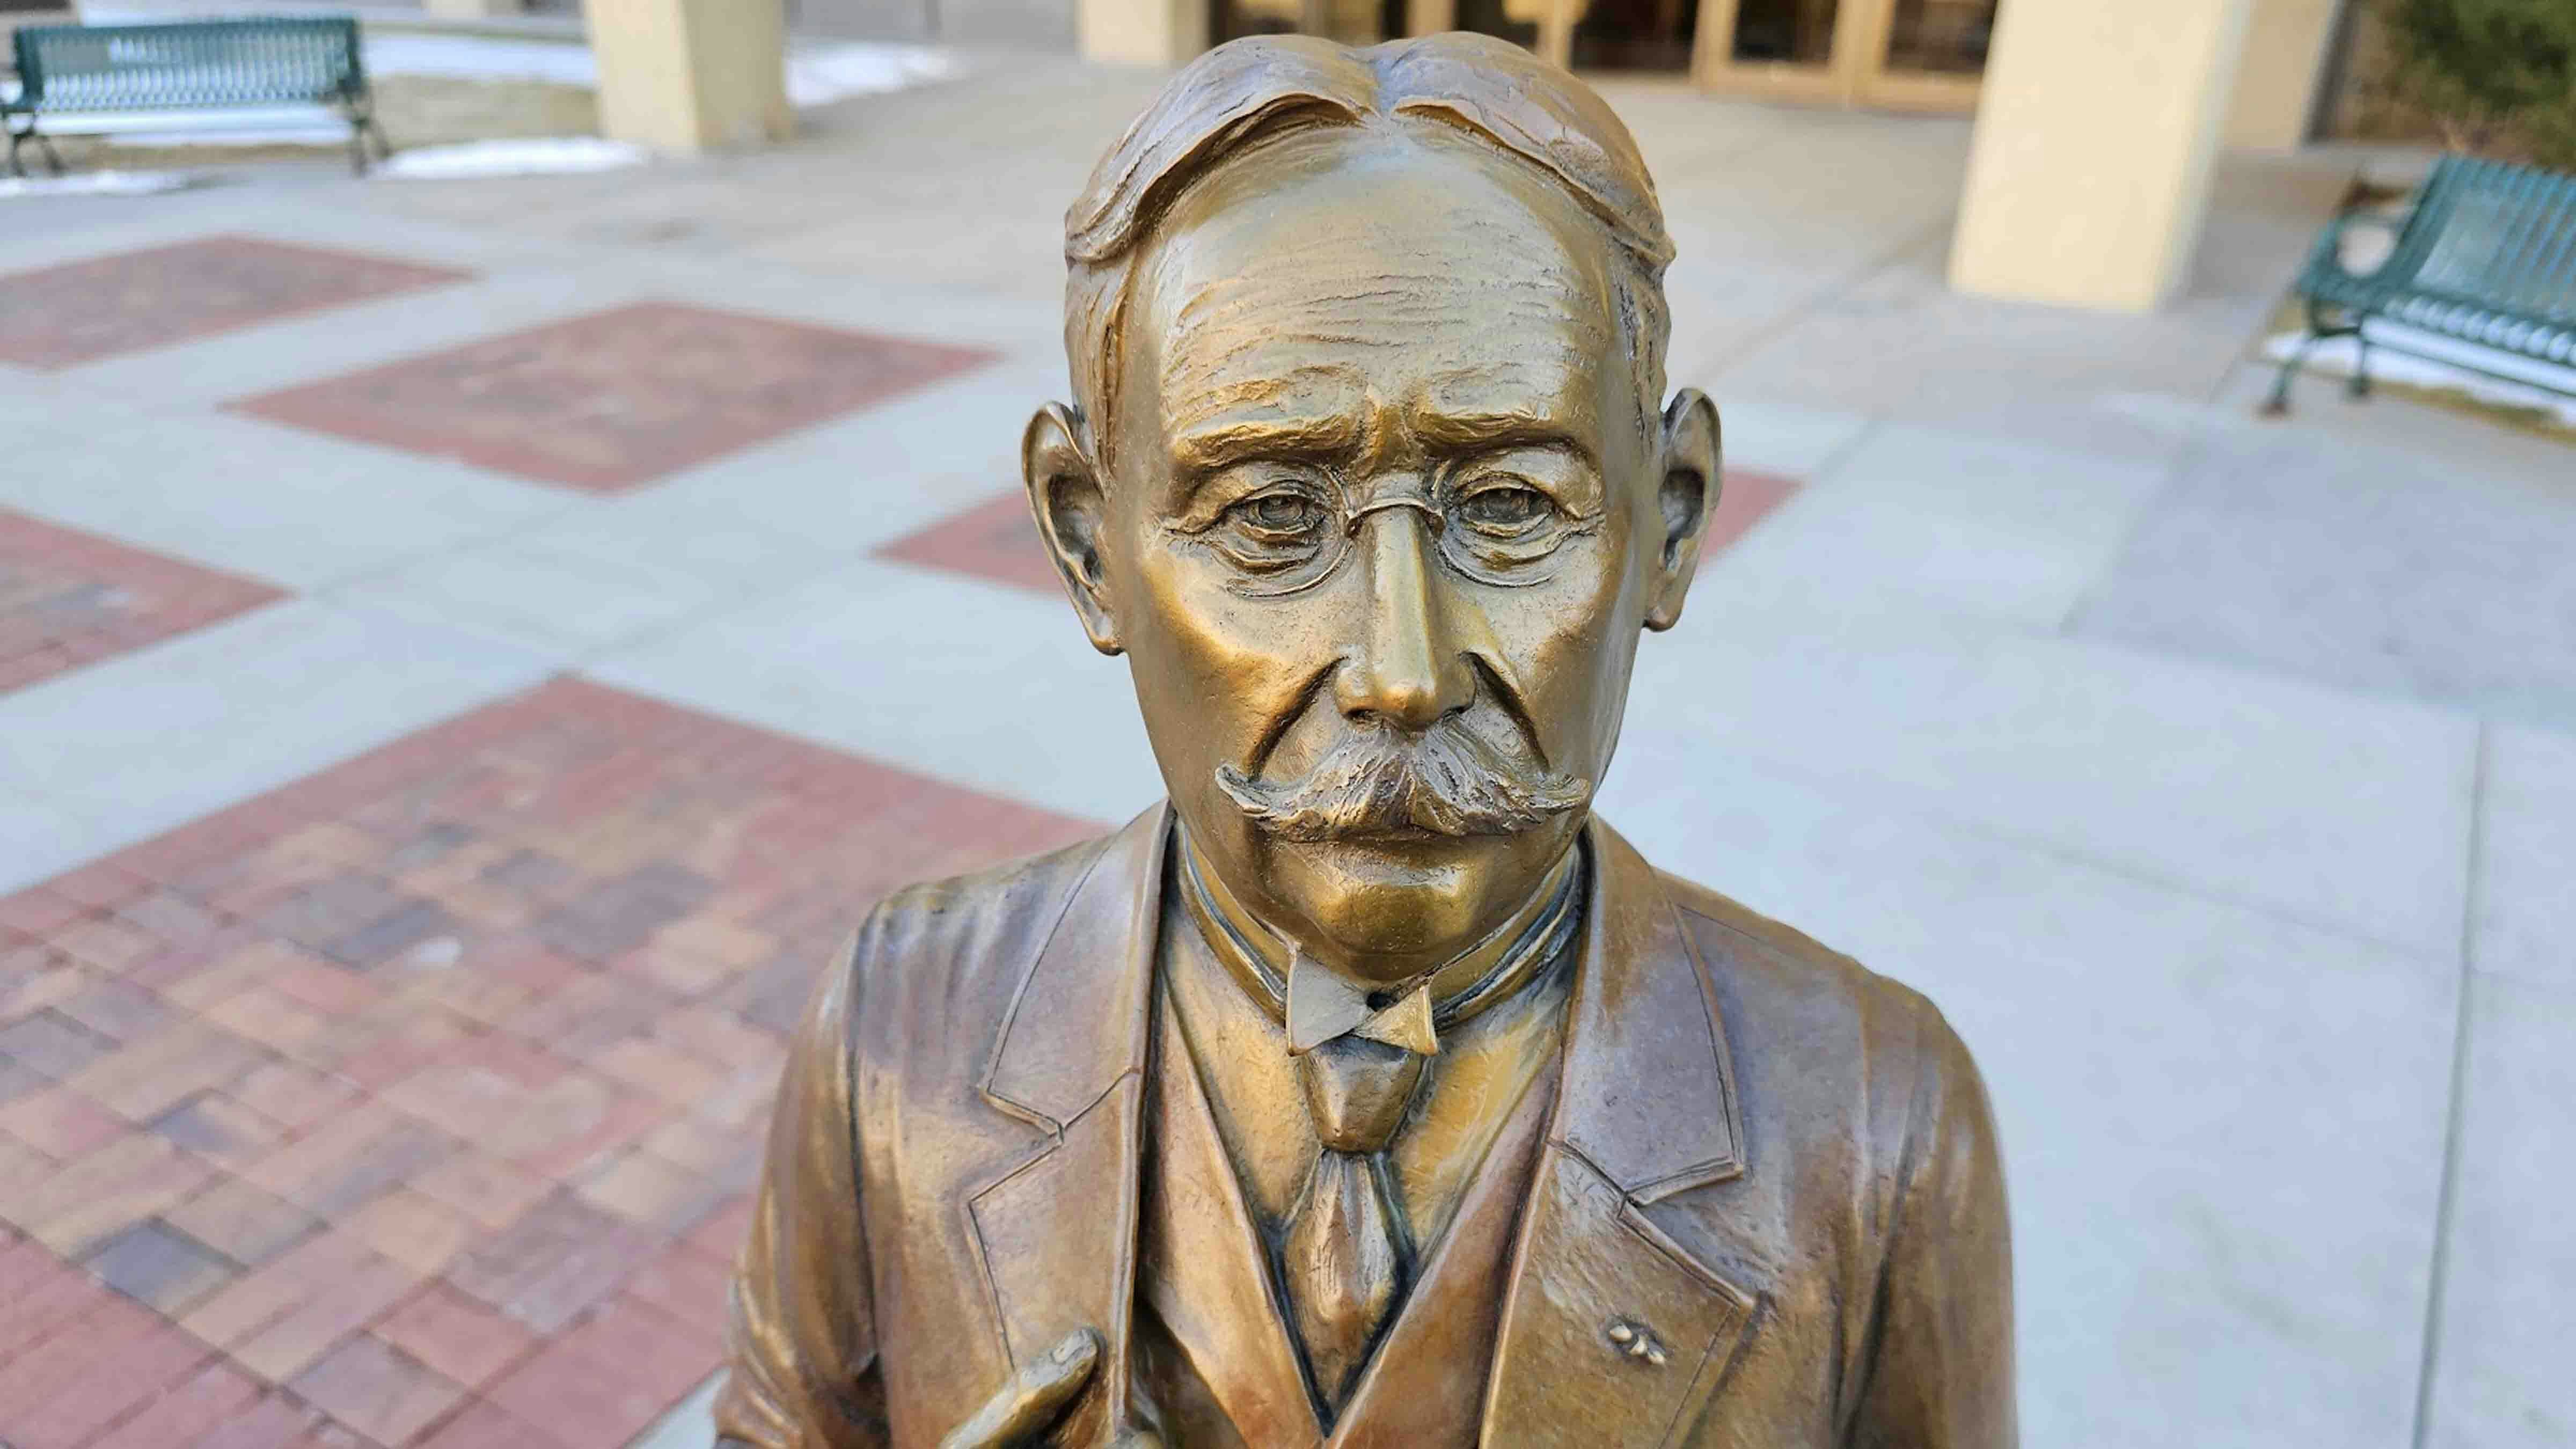 Sen. Francis E. Warren, thought by many to be Wyoming's greatest statesman. Sculpted by Guadalupe Barajas and donated by Wyoming Angus Ranch